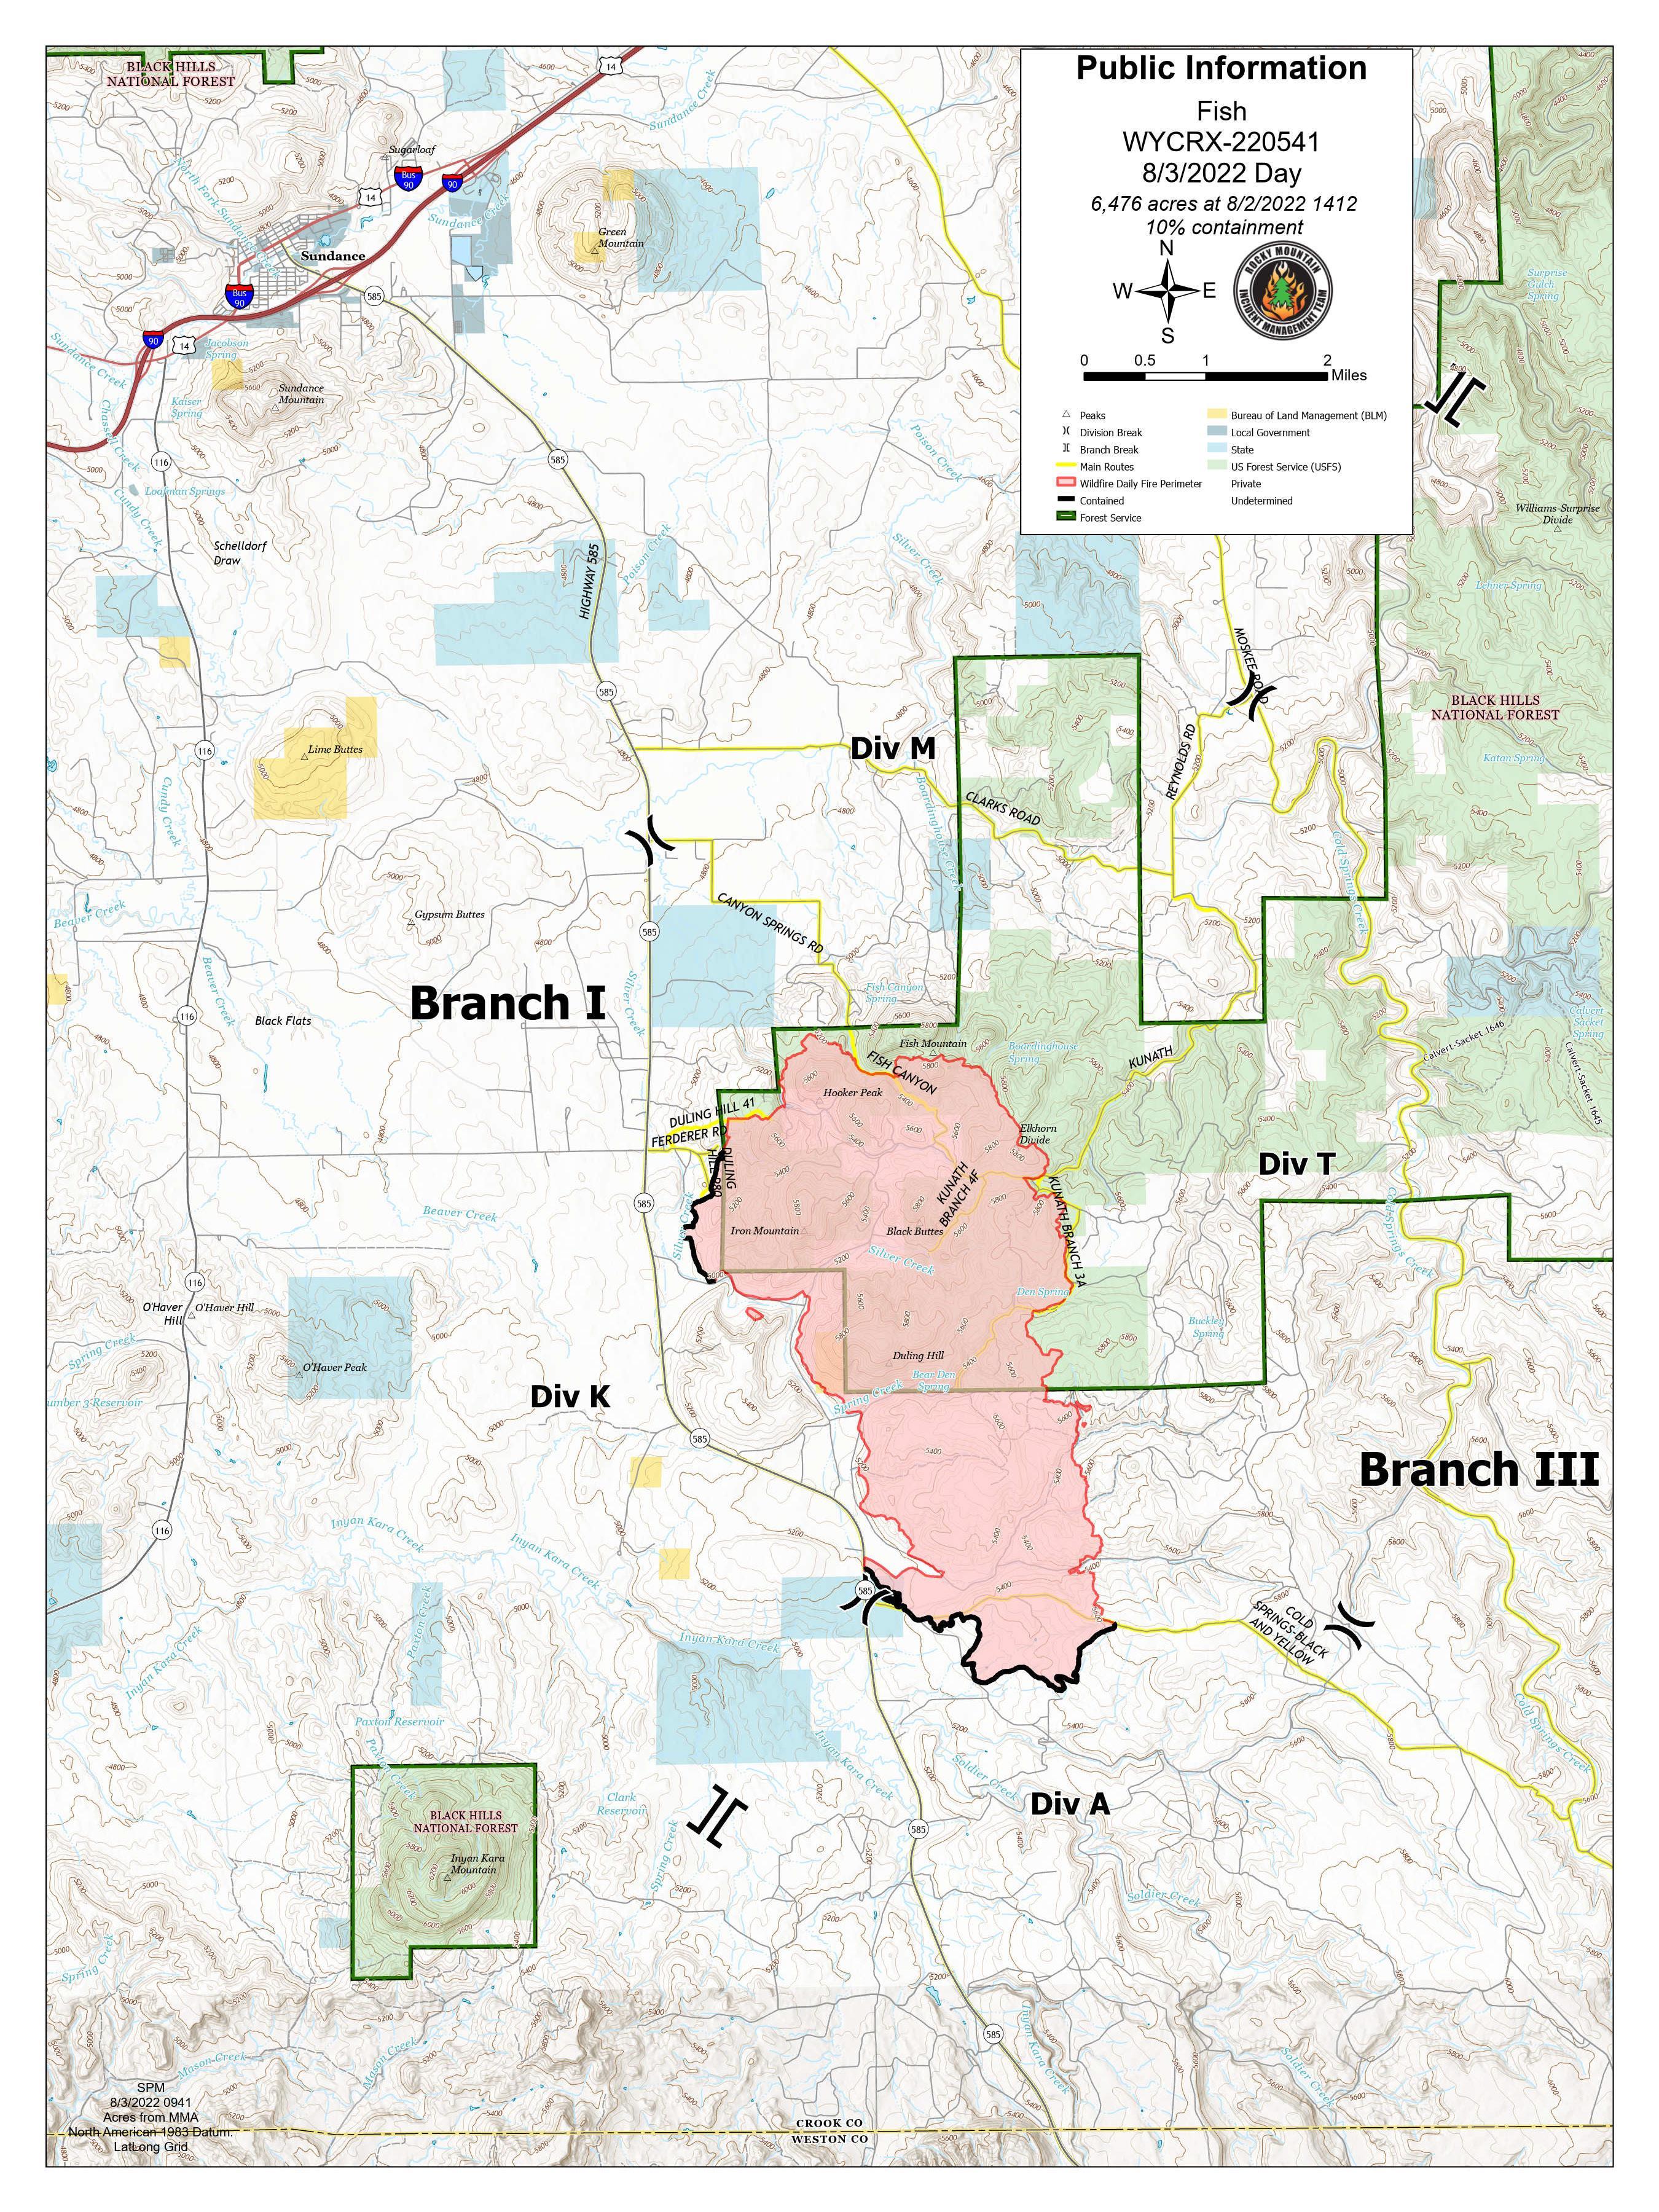 Fish Fire map, Wednesday, August 3